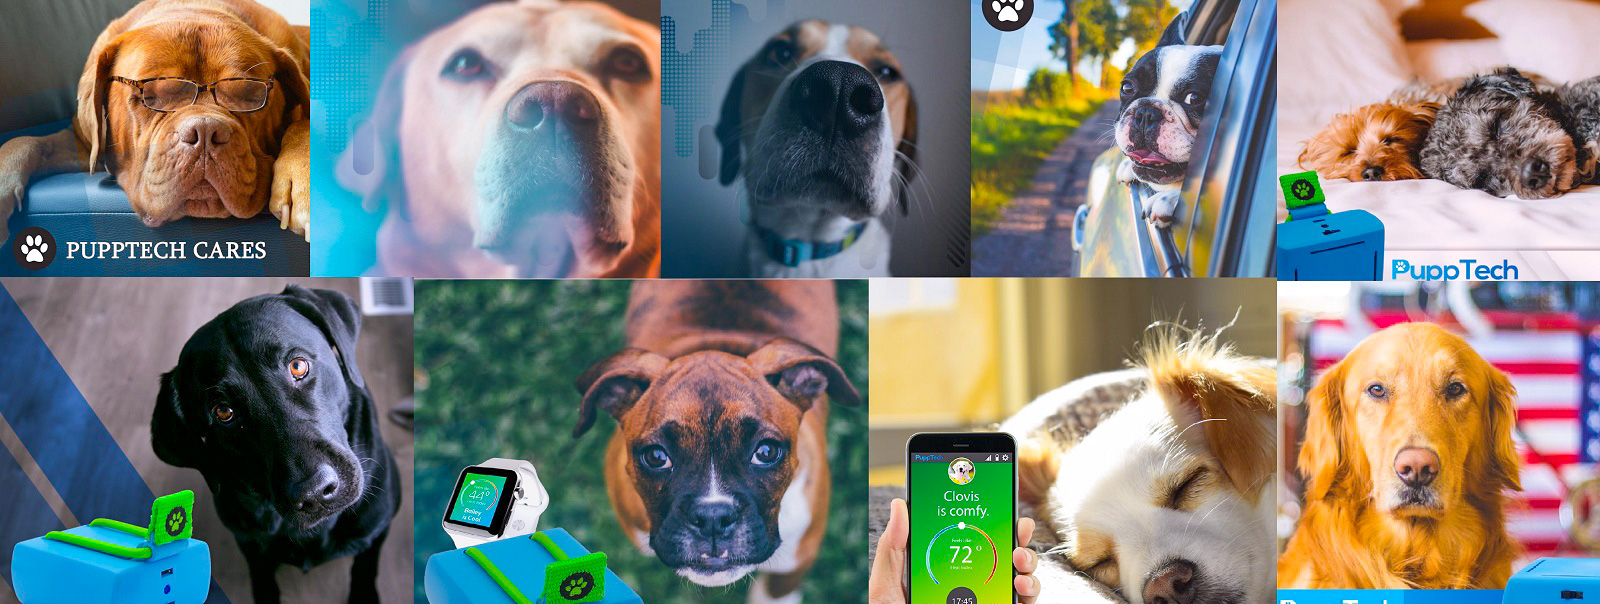 PuppComm is an innovative device for monitoring your dog